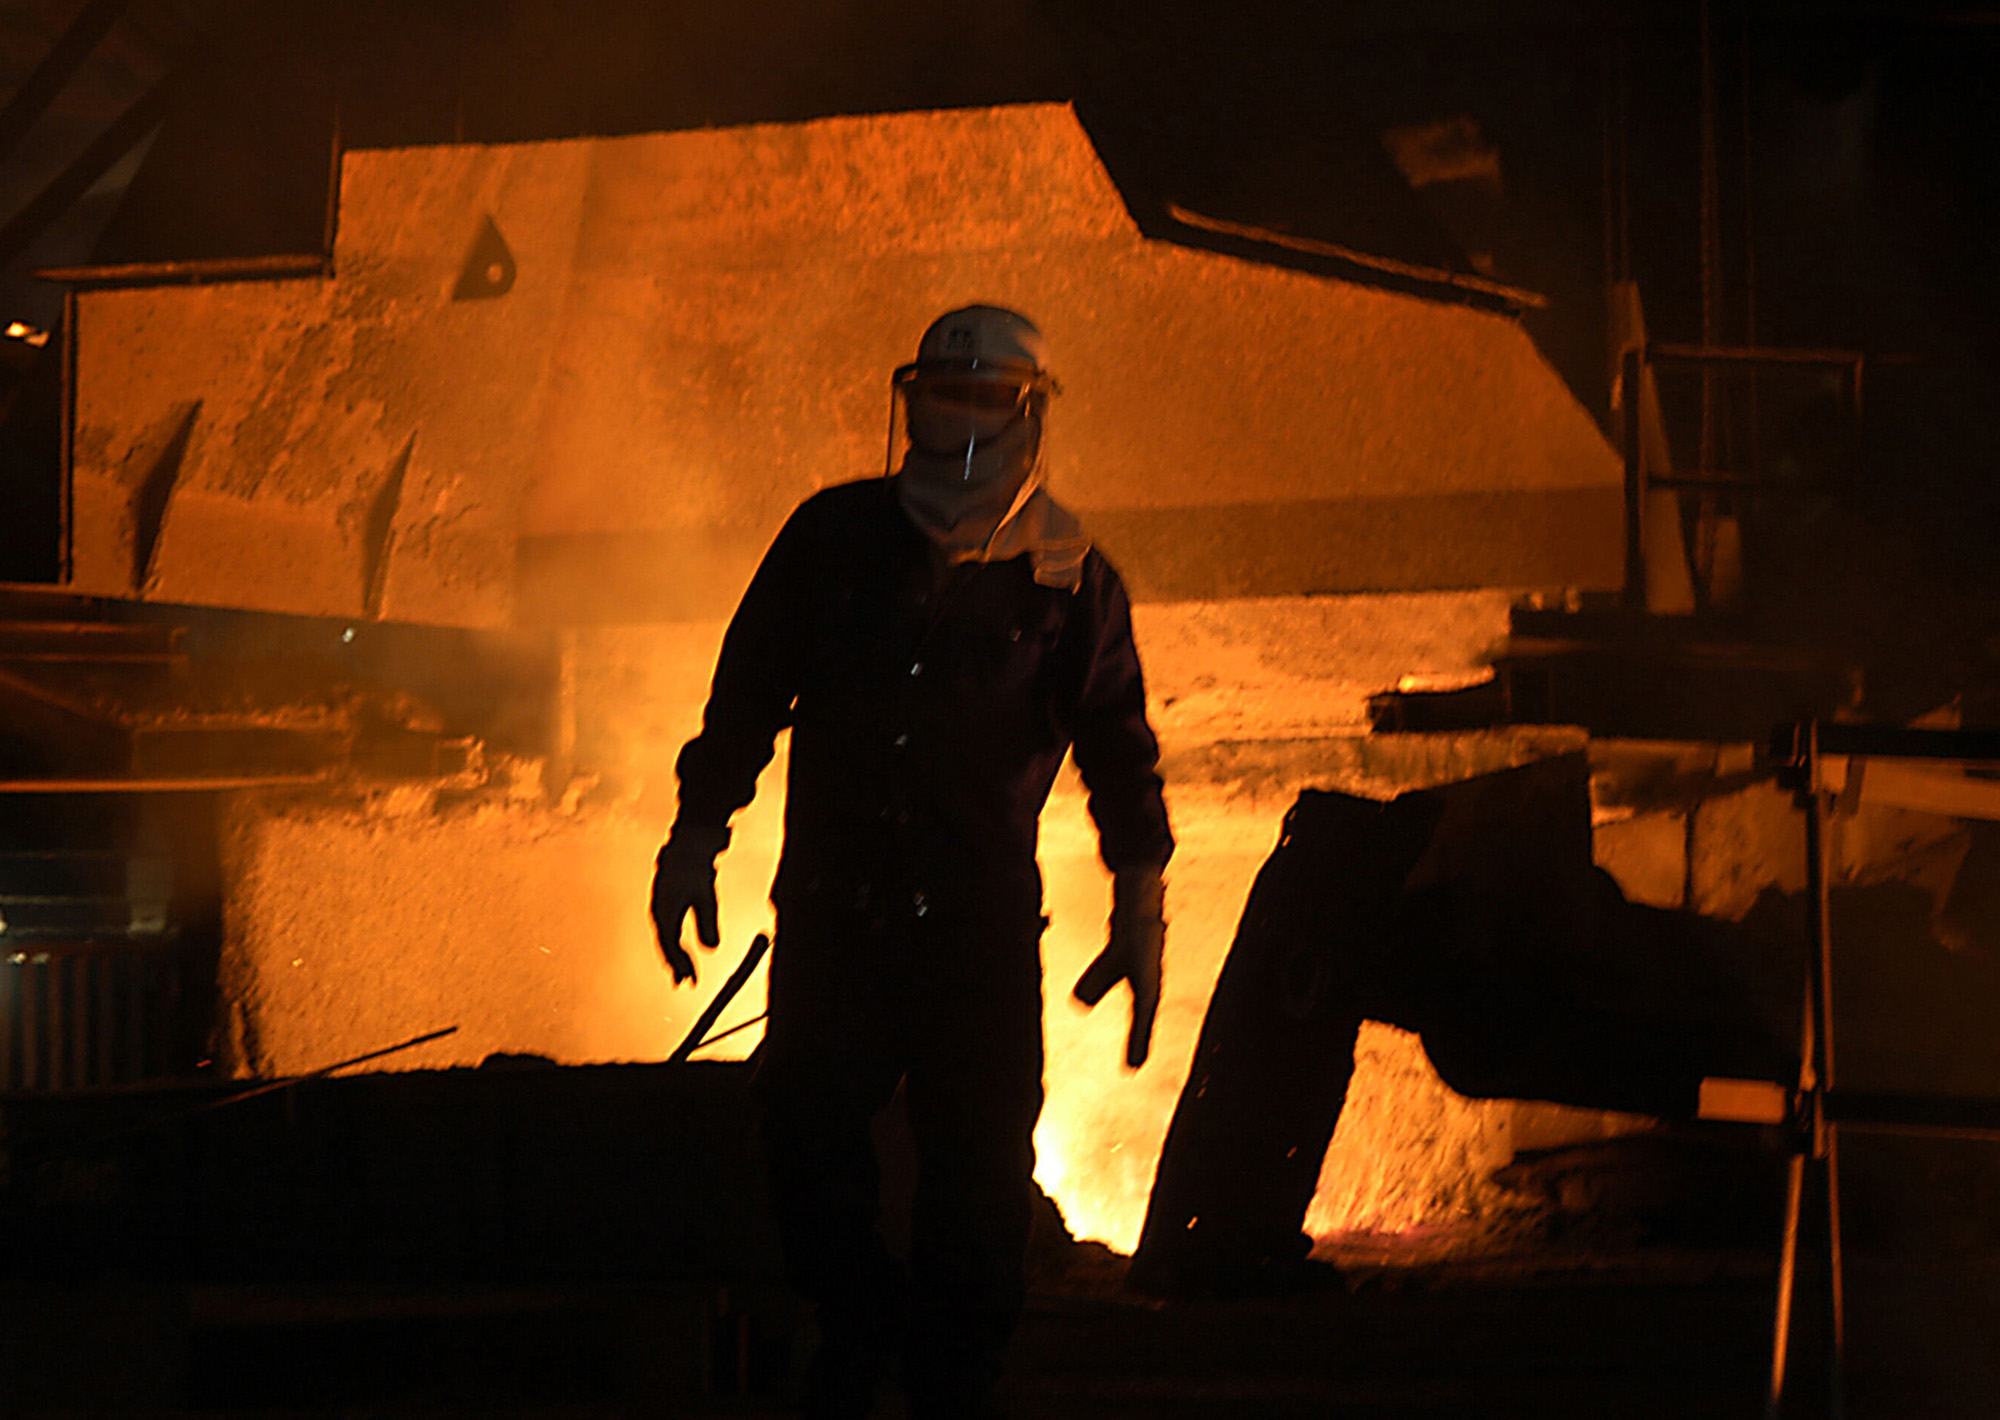 Tata Steel, Germany's SMS group to explore low carbon steel making